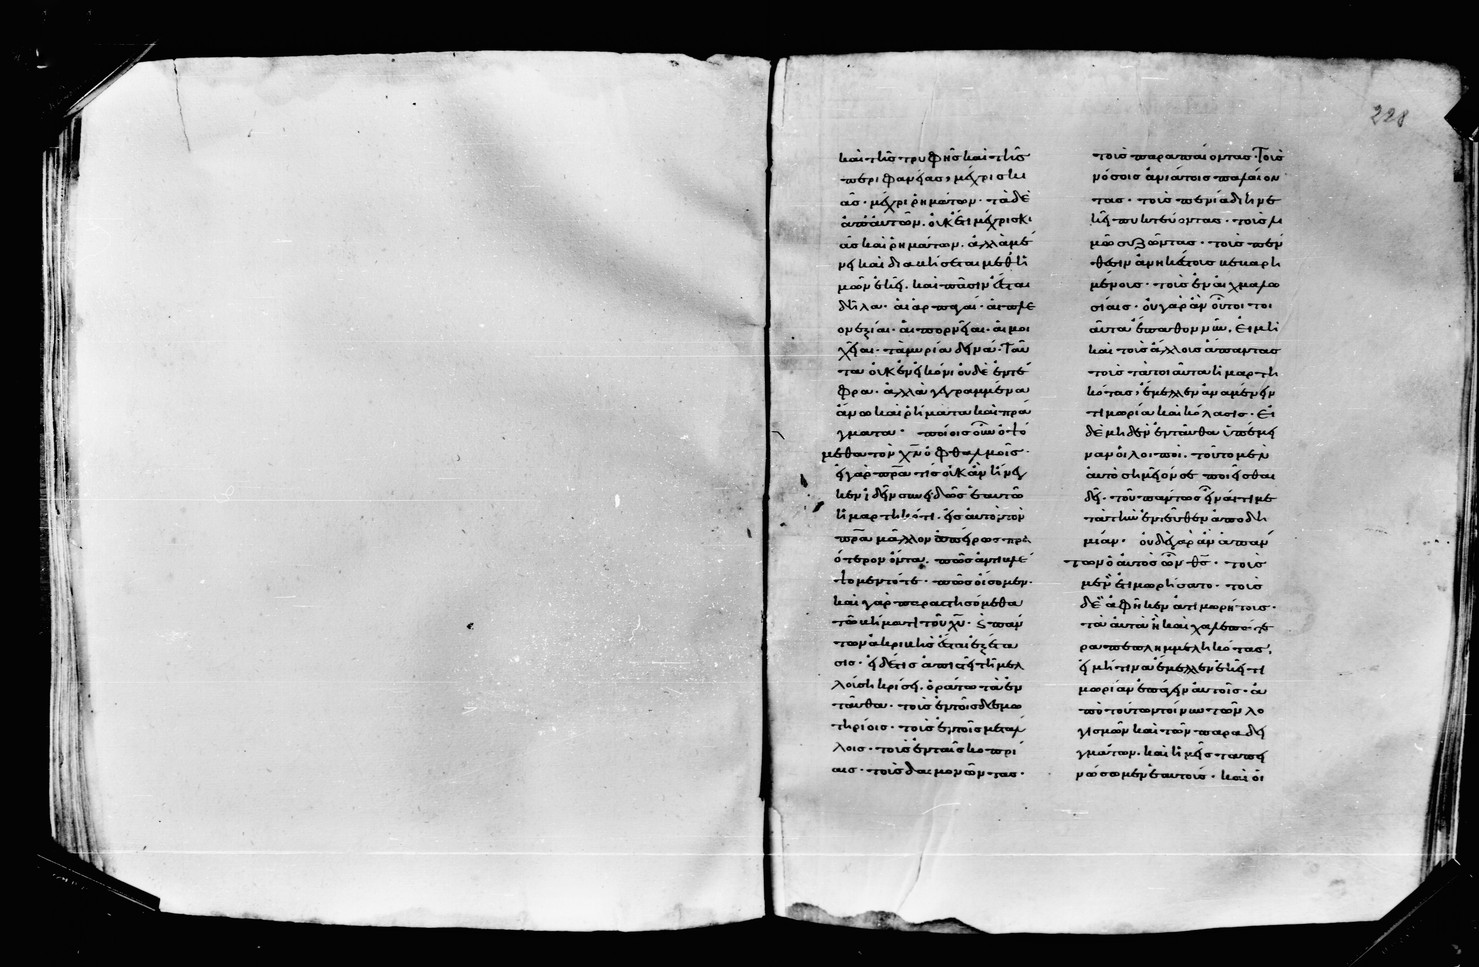 PLA_25_numbered_paper_leaf_227 after_the_fragment_f_228r_main_codex_